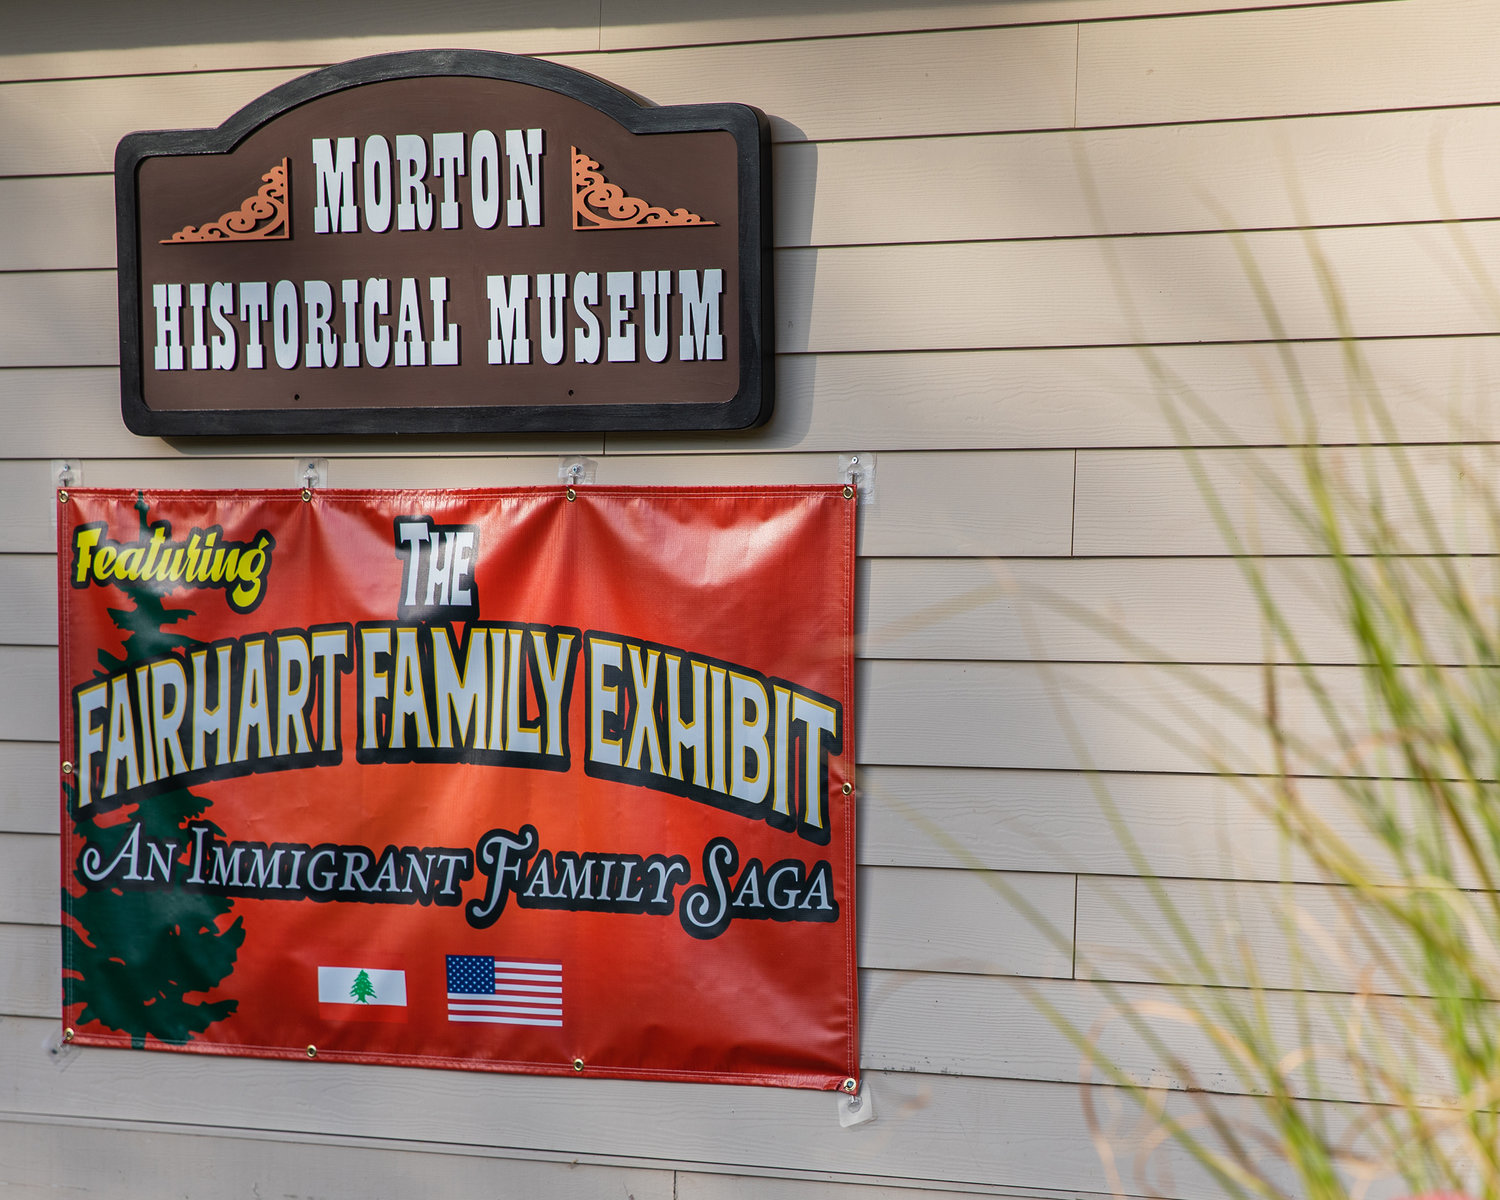 Signage for “The Fairhart Family Exhibit,” hangs on display outside the Morton Historical Museum on Wednesday.